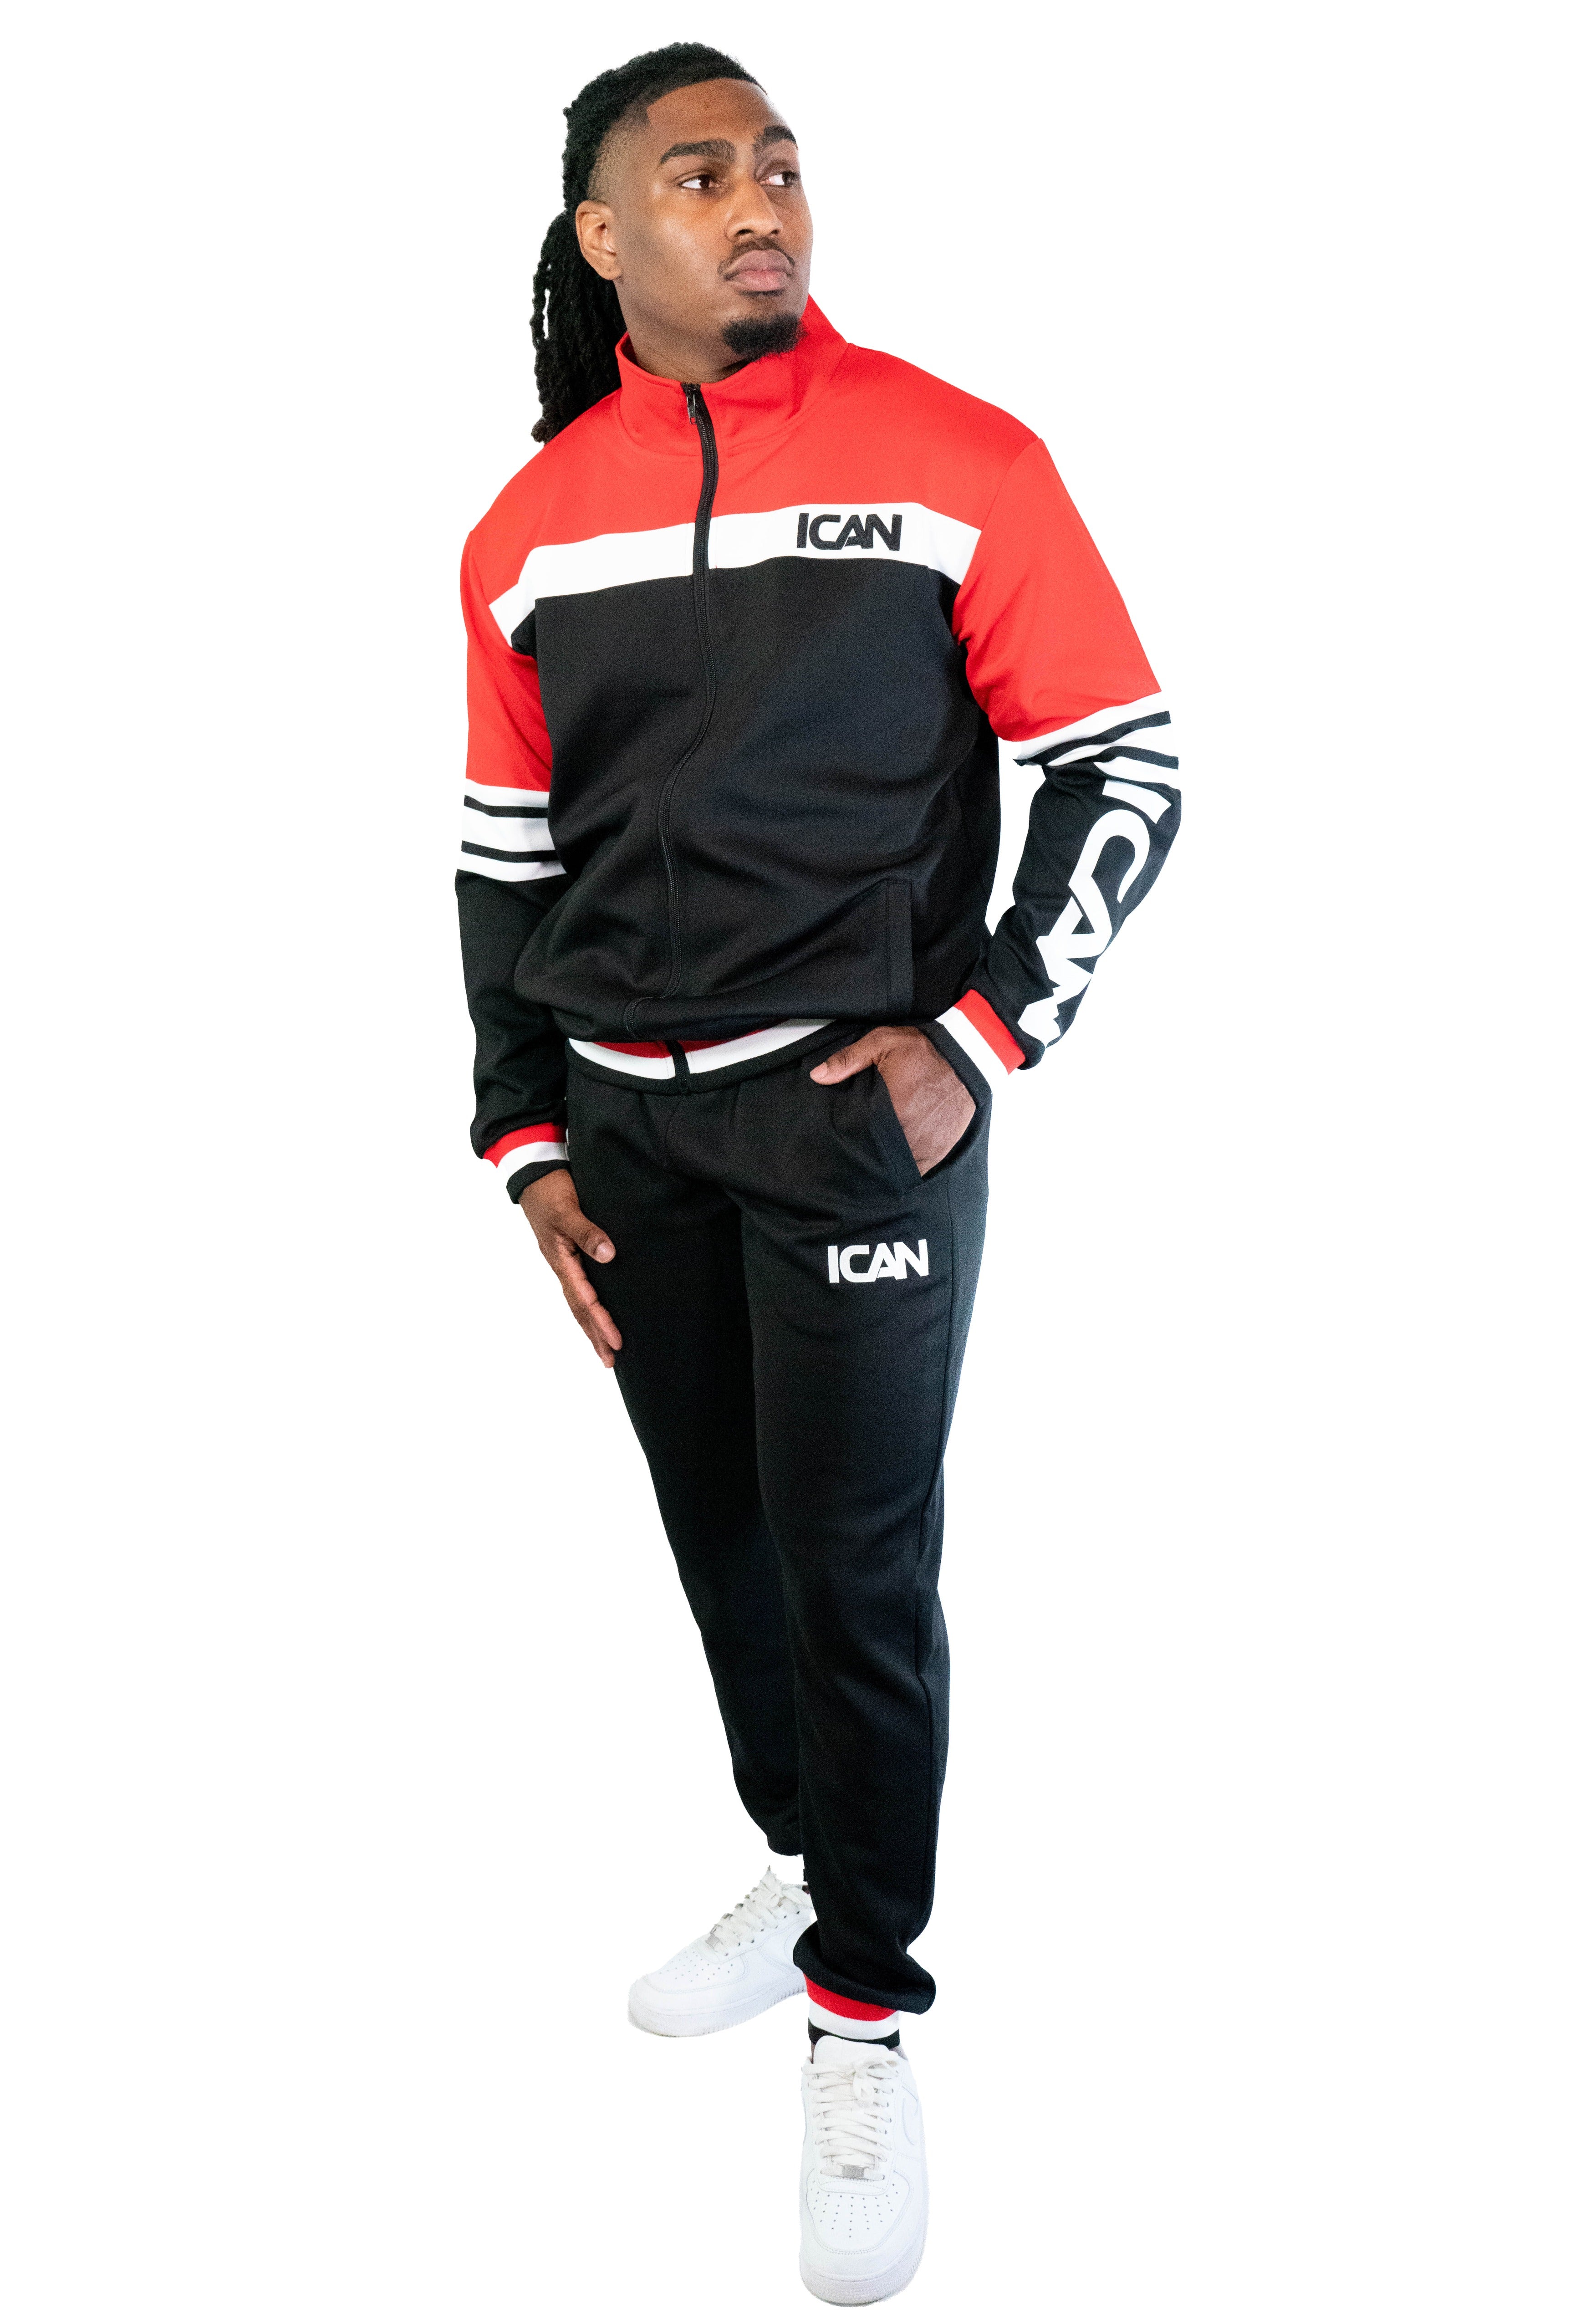 Red, White, and Black Track Suit – The Look!